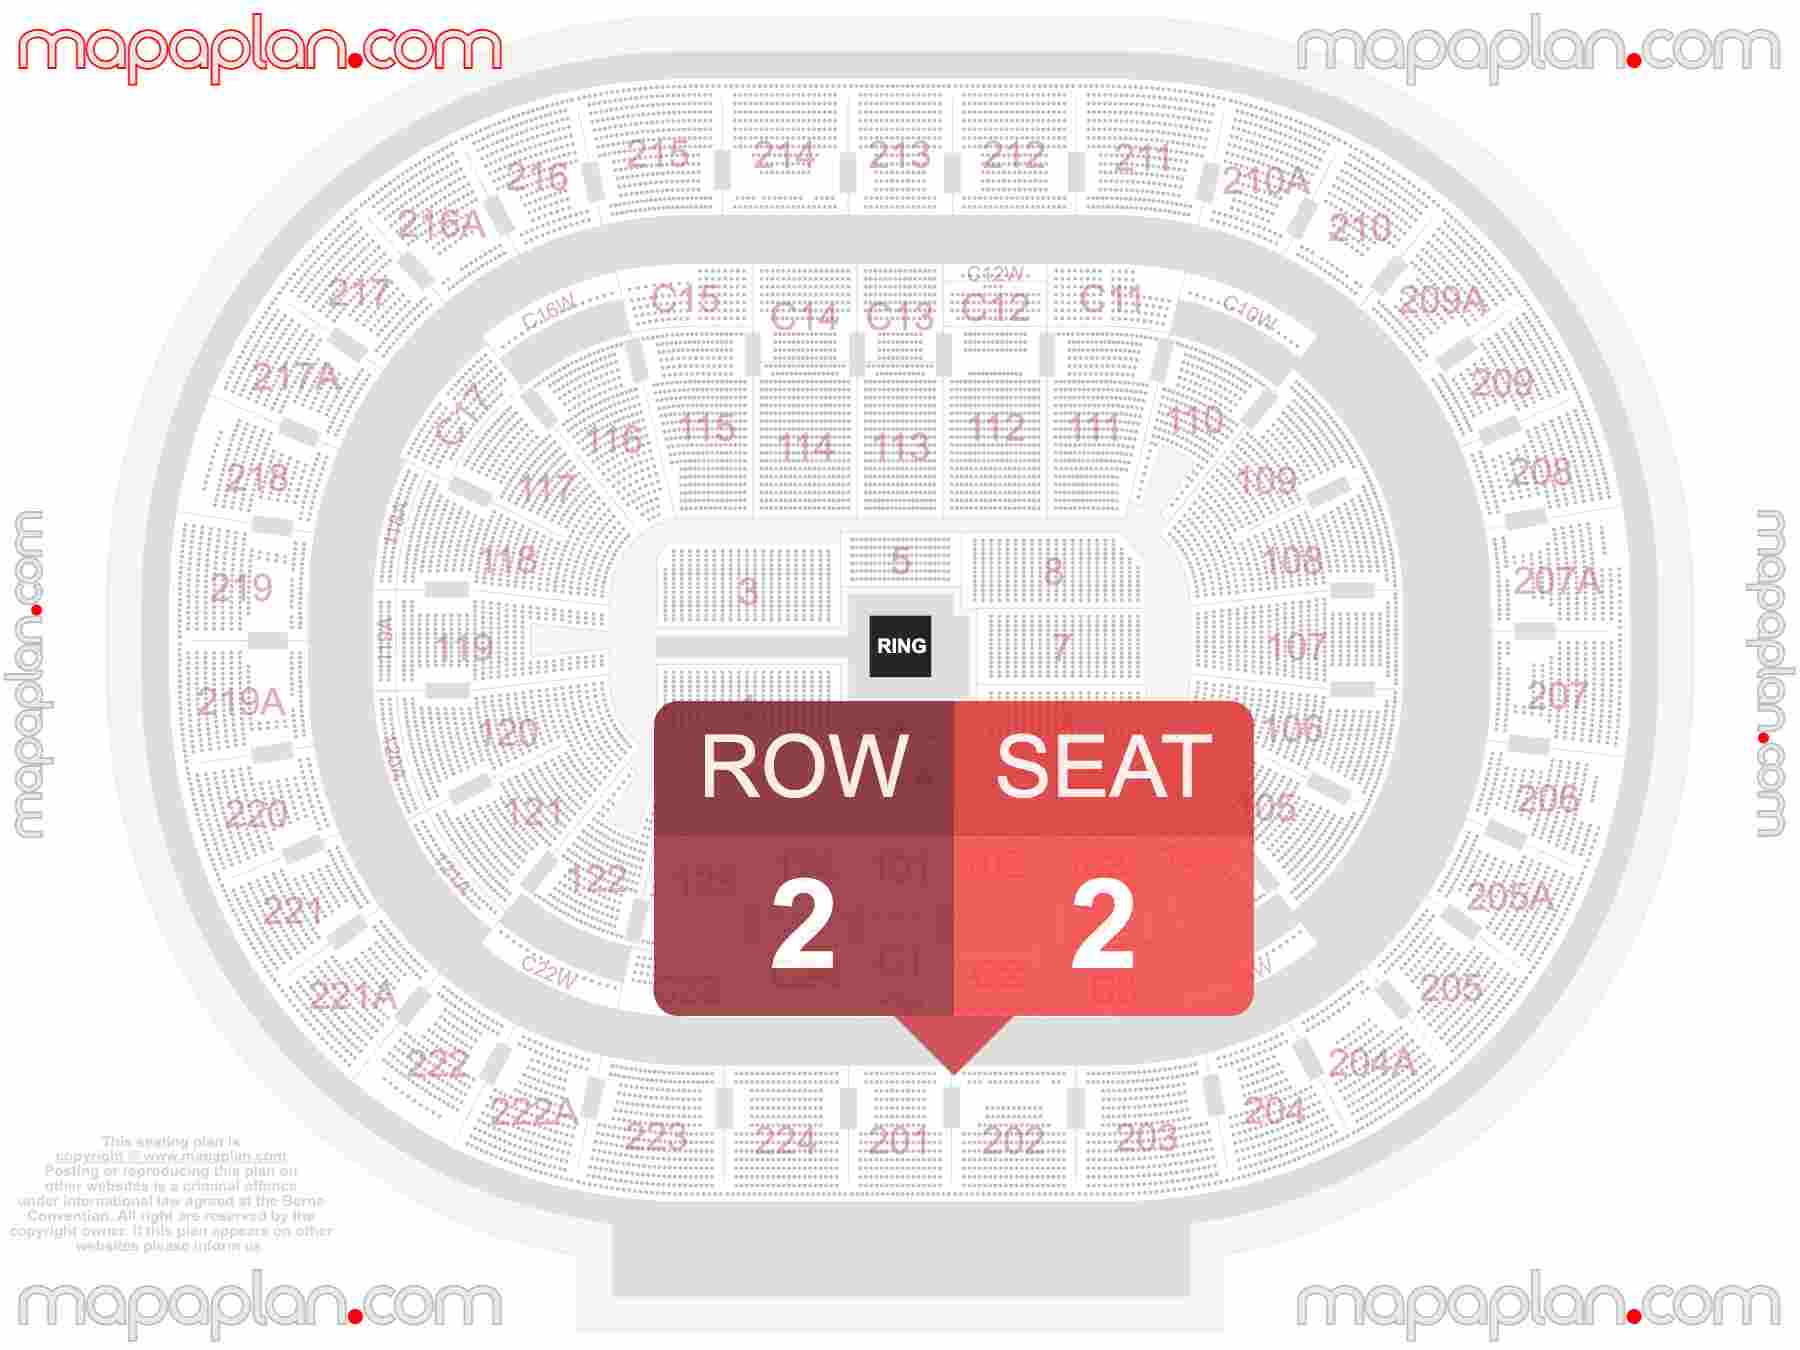 Philadelphia Wells Fargo Center seating chart WWE wrestling & boxing precise seat finder - Explore seating chart with exact section, seat and row numbers